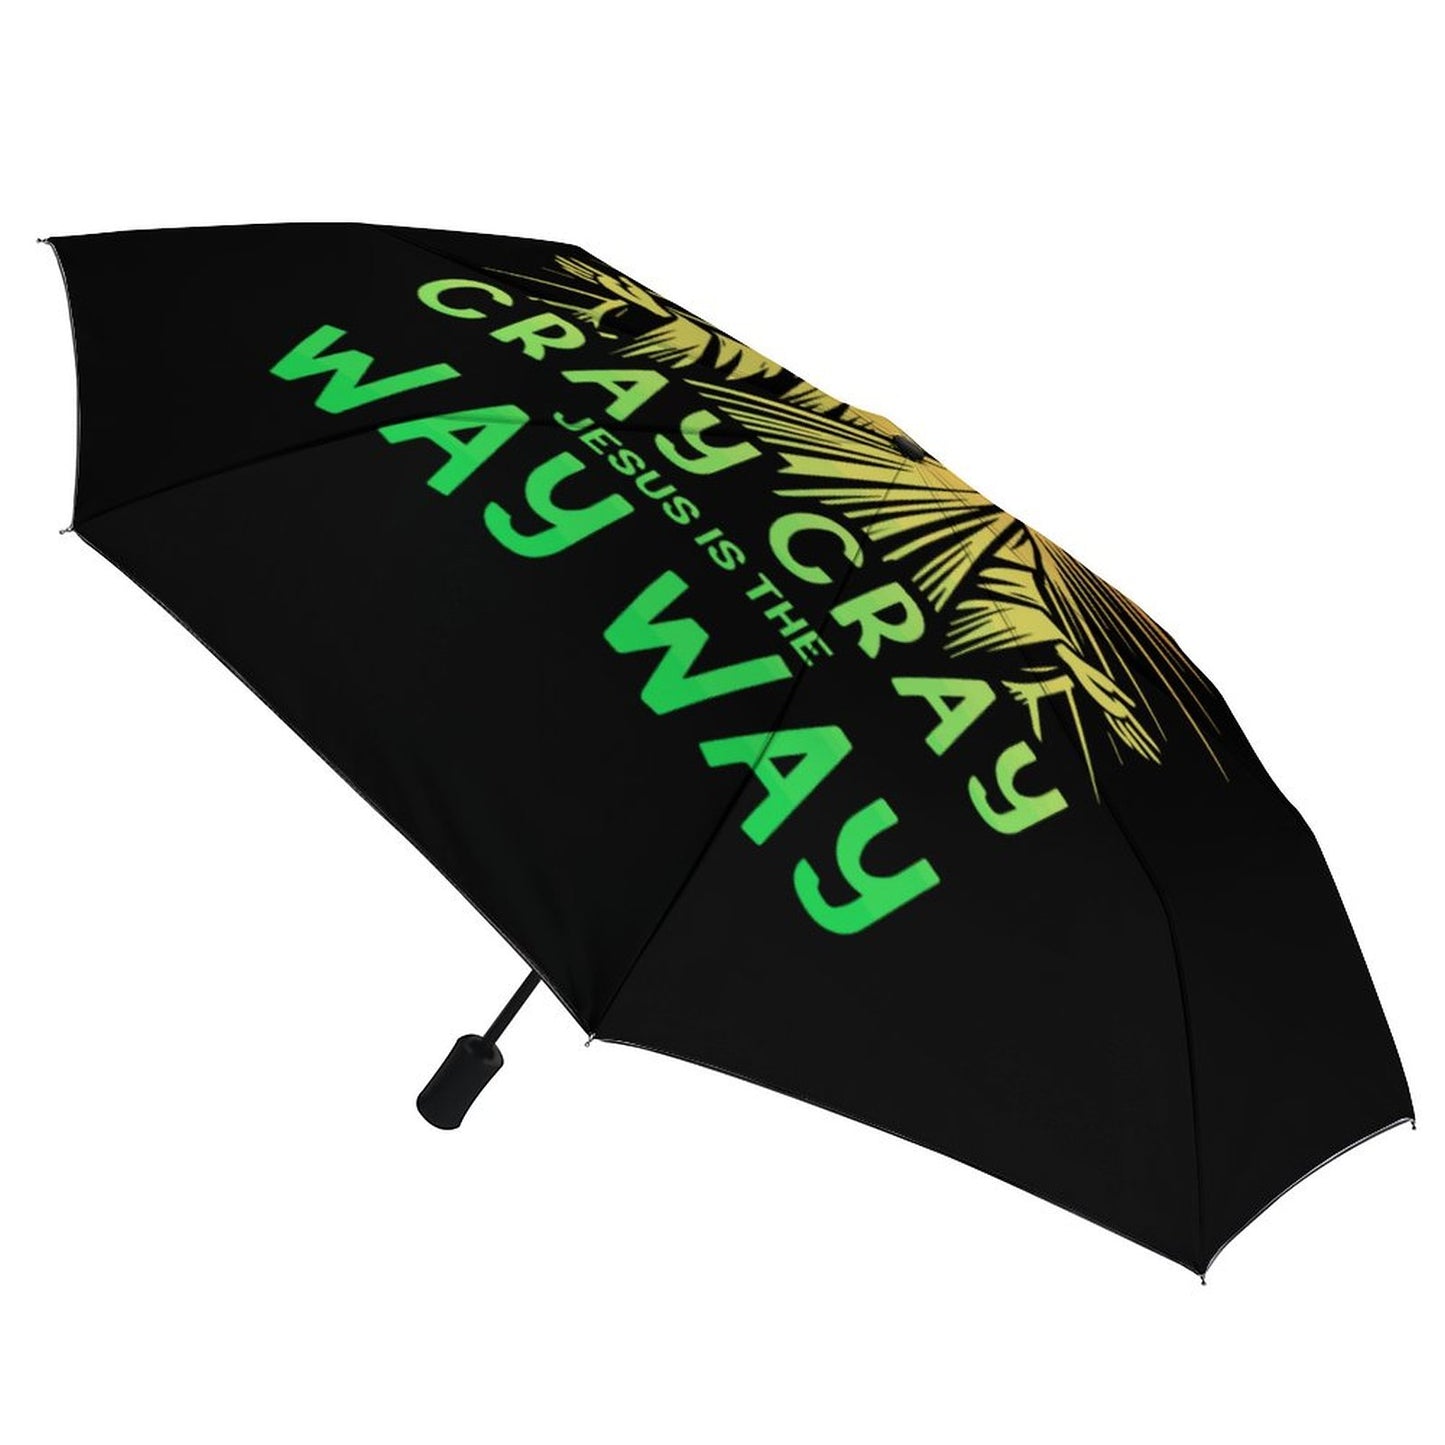 Remember When Life Gets Cray Cray Jesus Is The Way Way Christian Umbrella